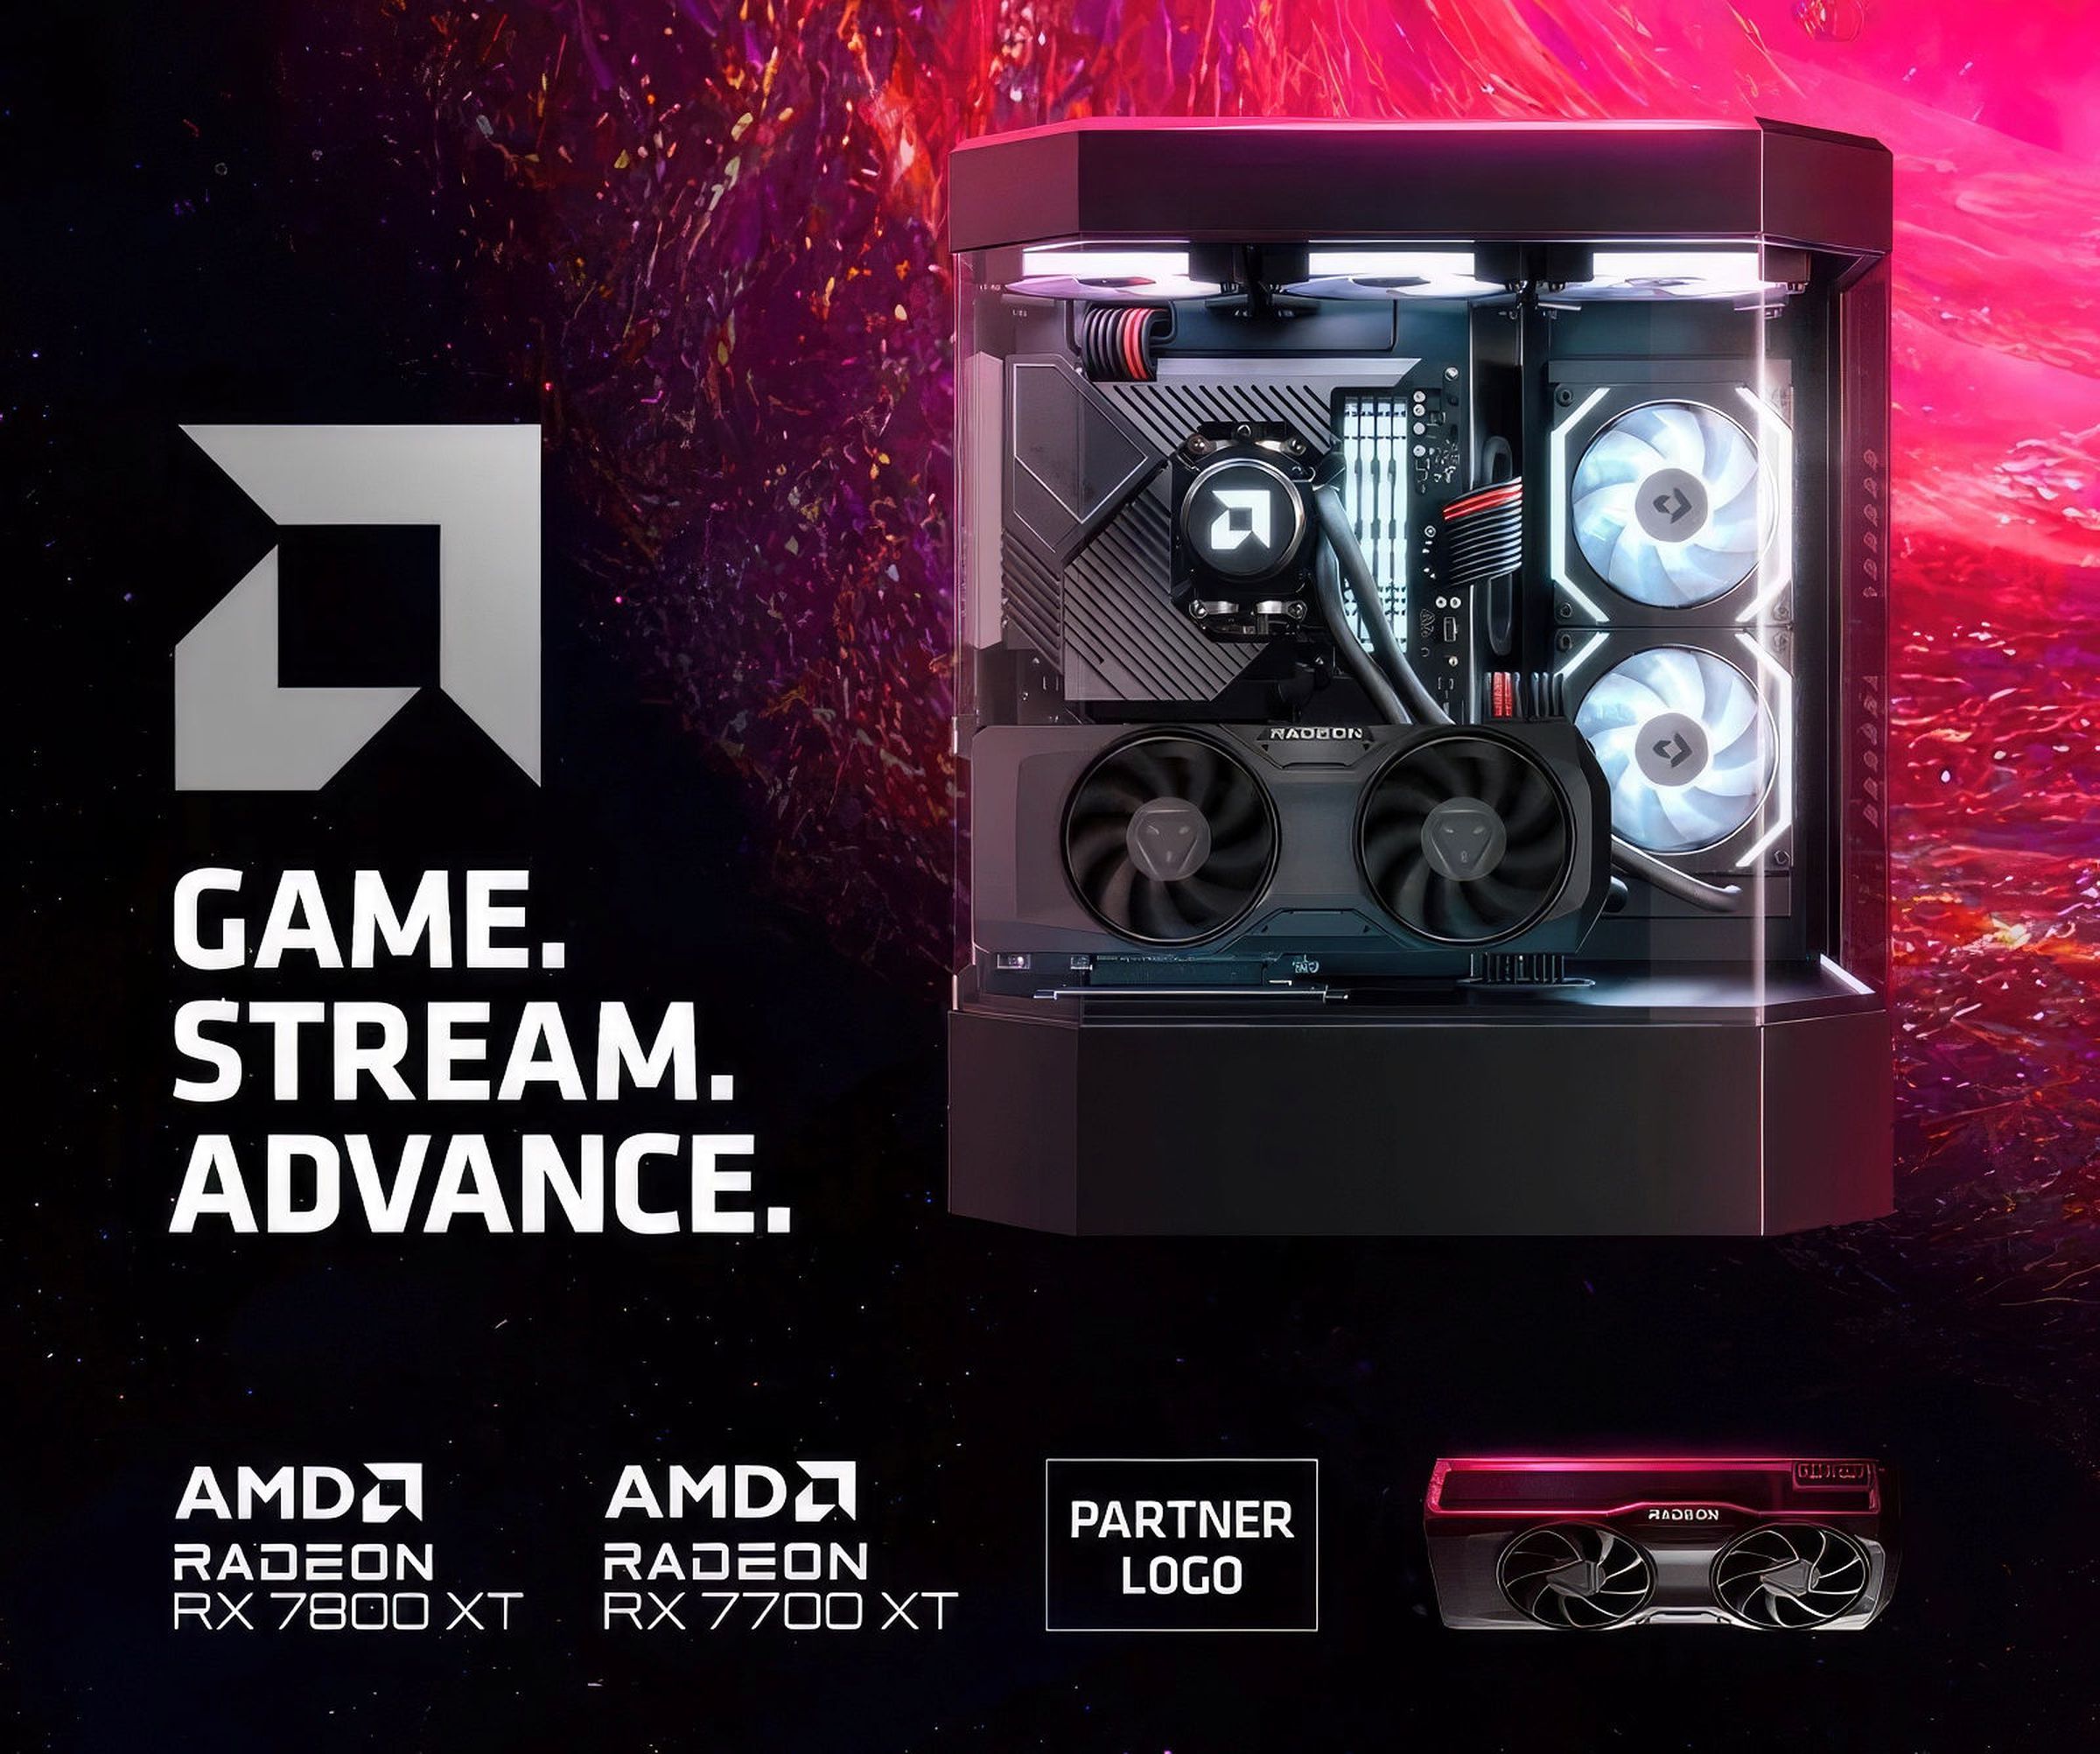 AMD posted its new Radeon details early.